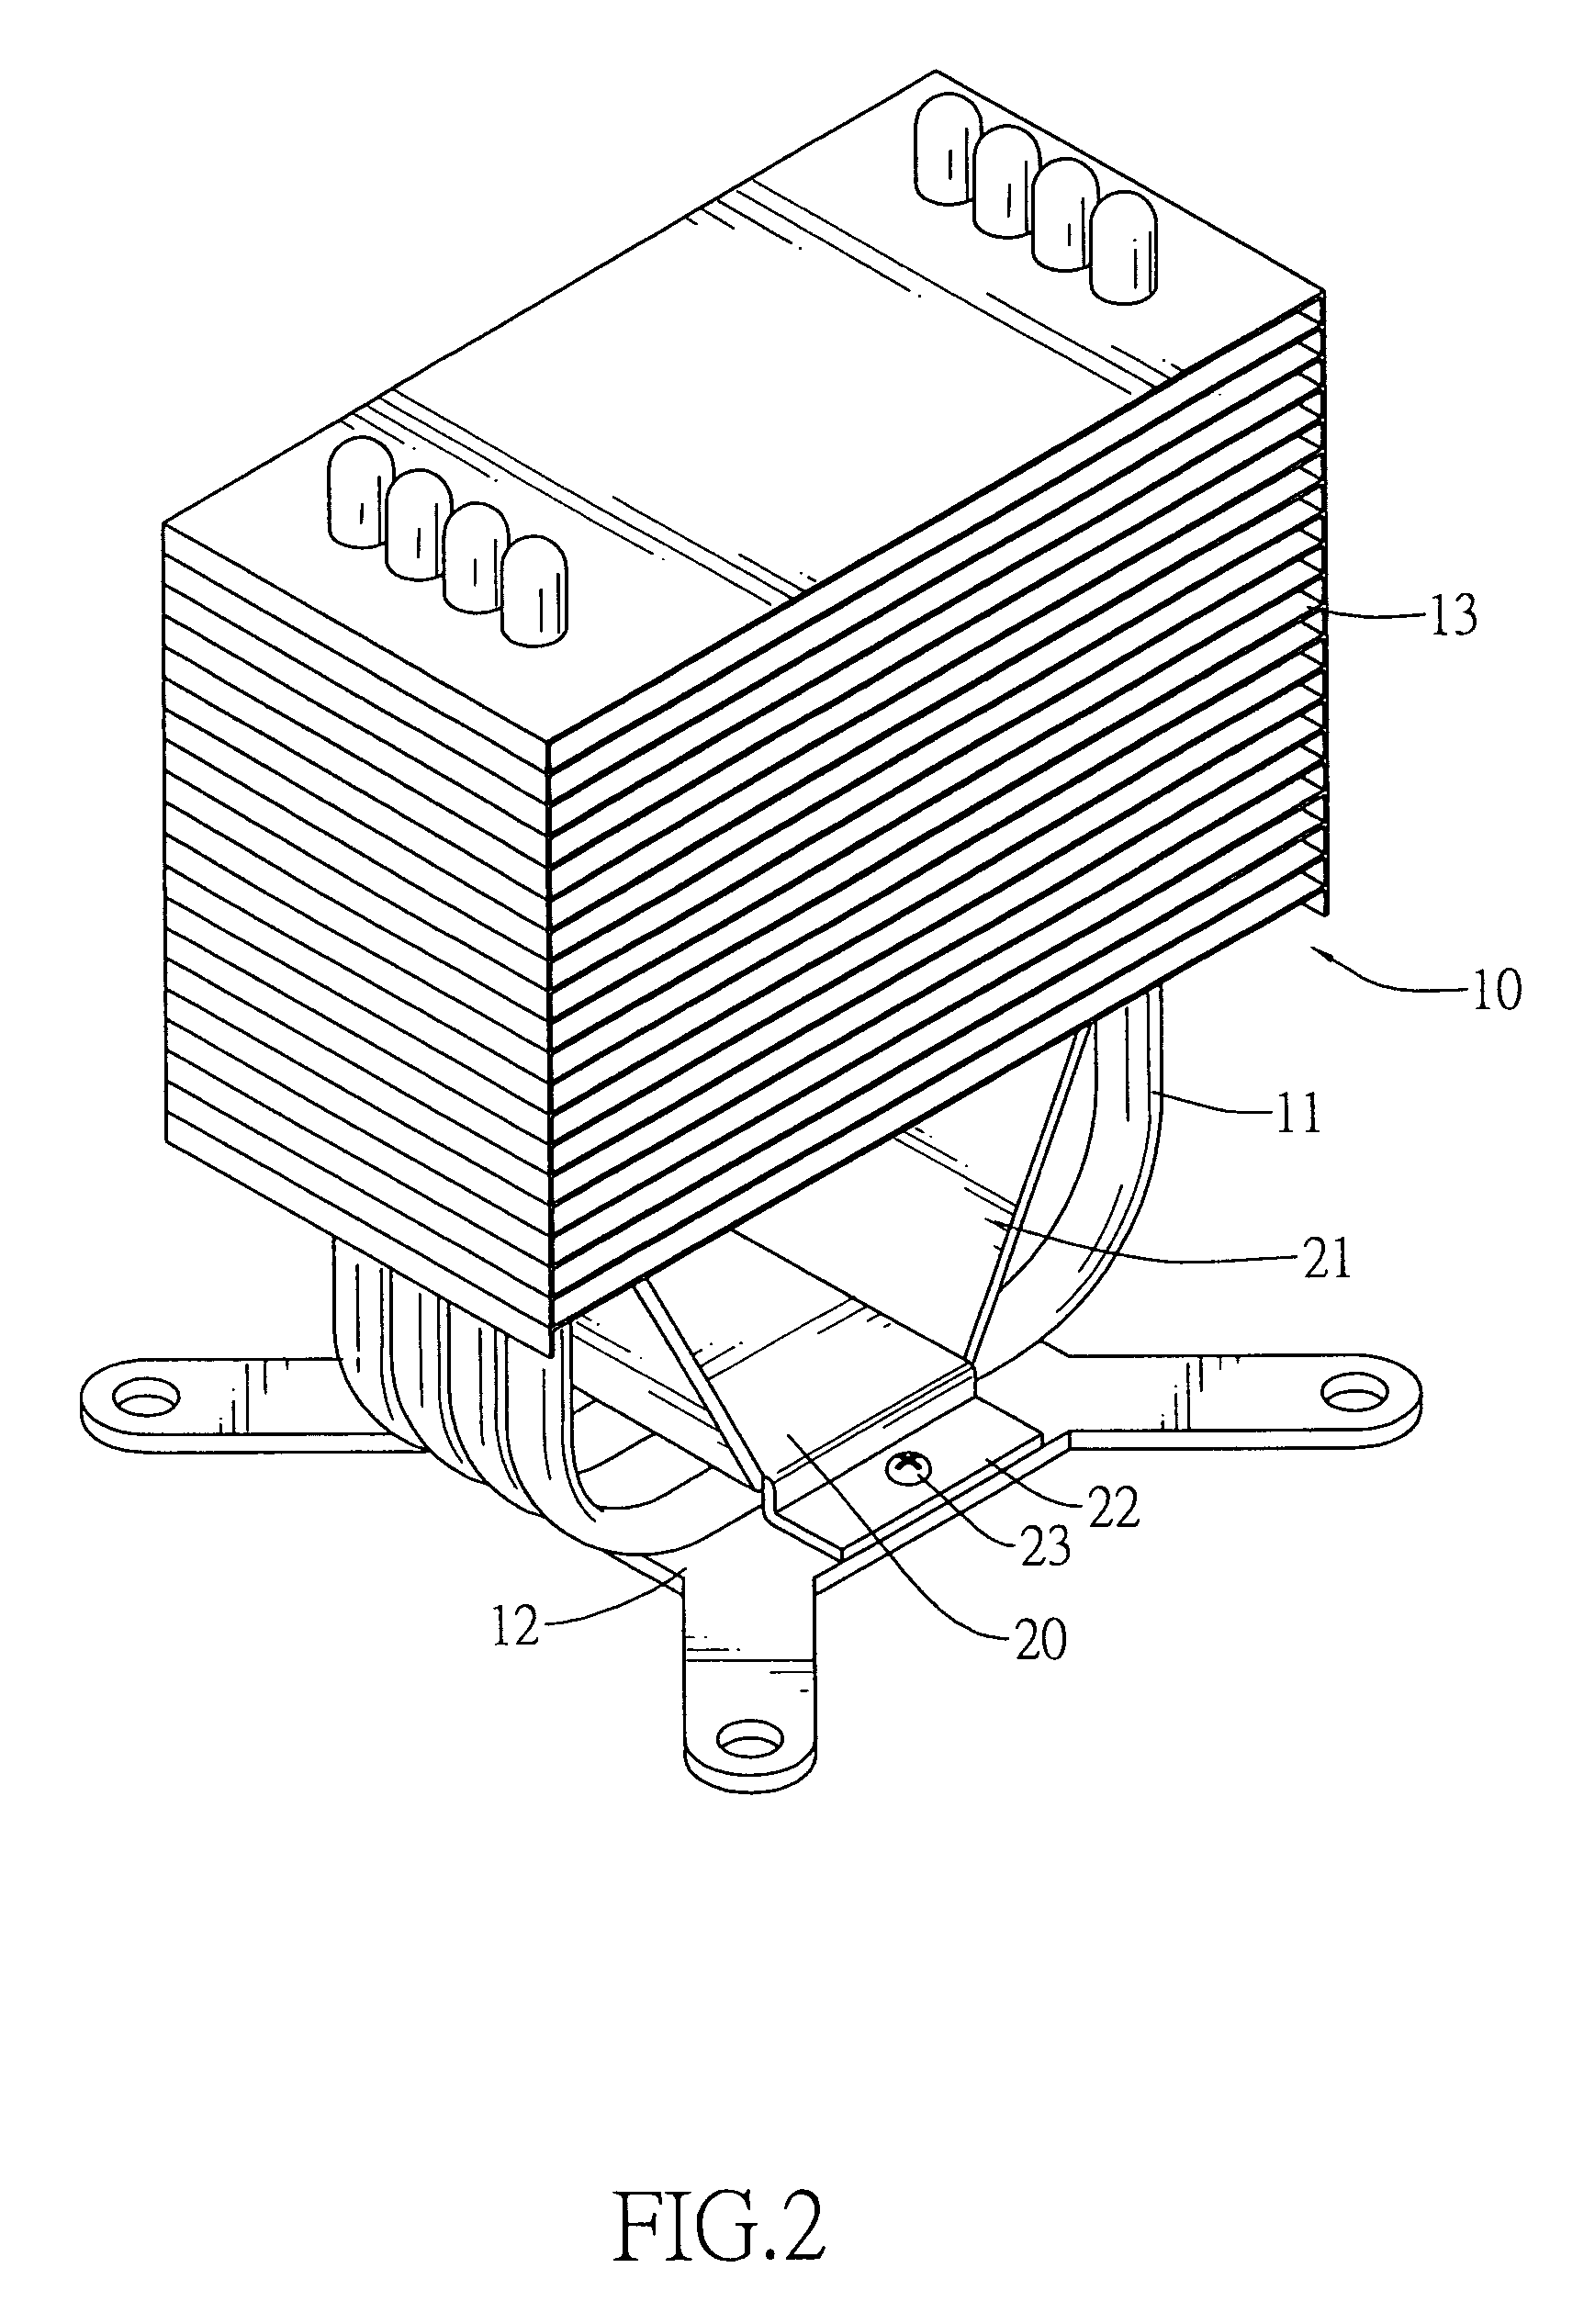 Supporting seat for supporting weight of heat dissipating fins to avoid deformation of heat dissipating tubes extending through the heat dissipating fins